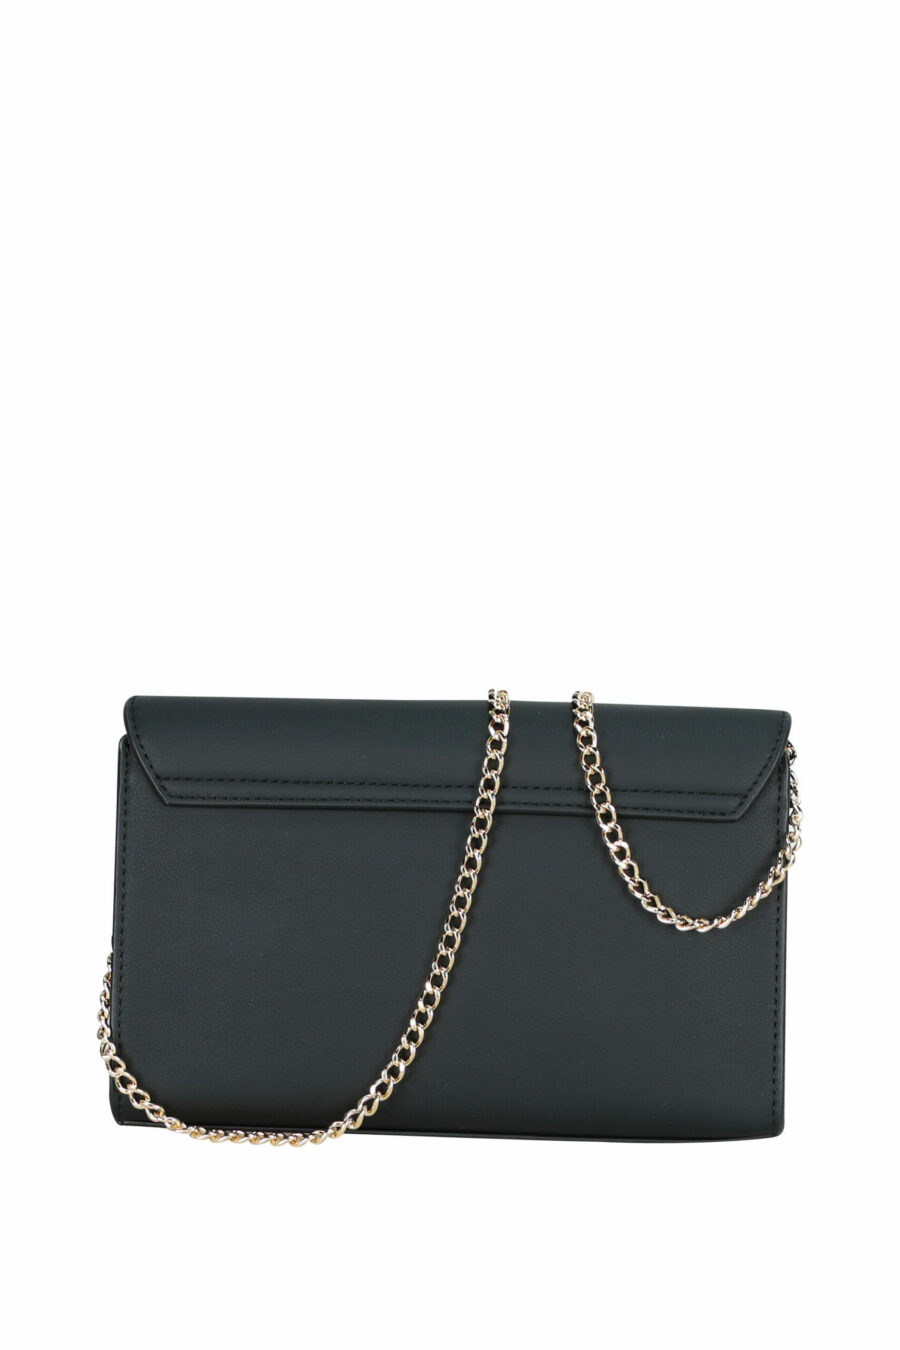 Black shoulder bag with chain and maxilogo "lettering" - 8050537396925 2 scaled